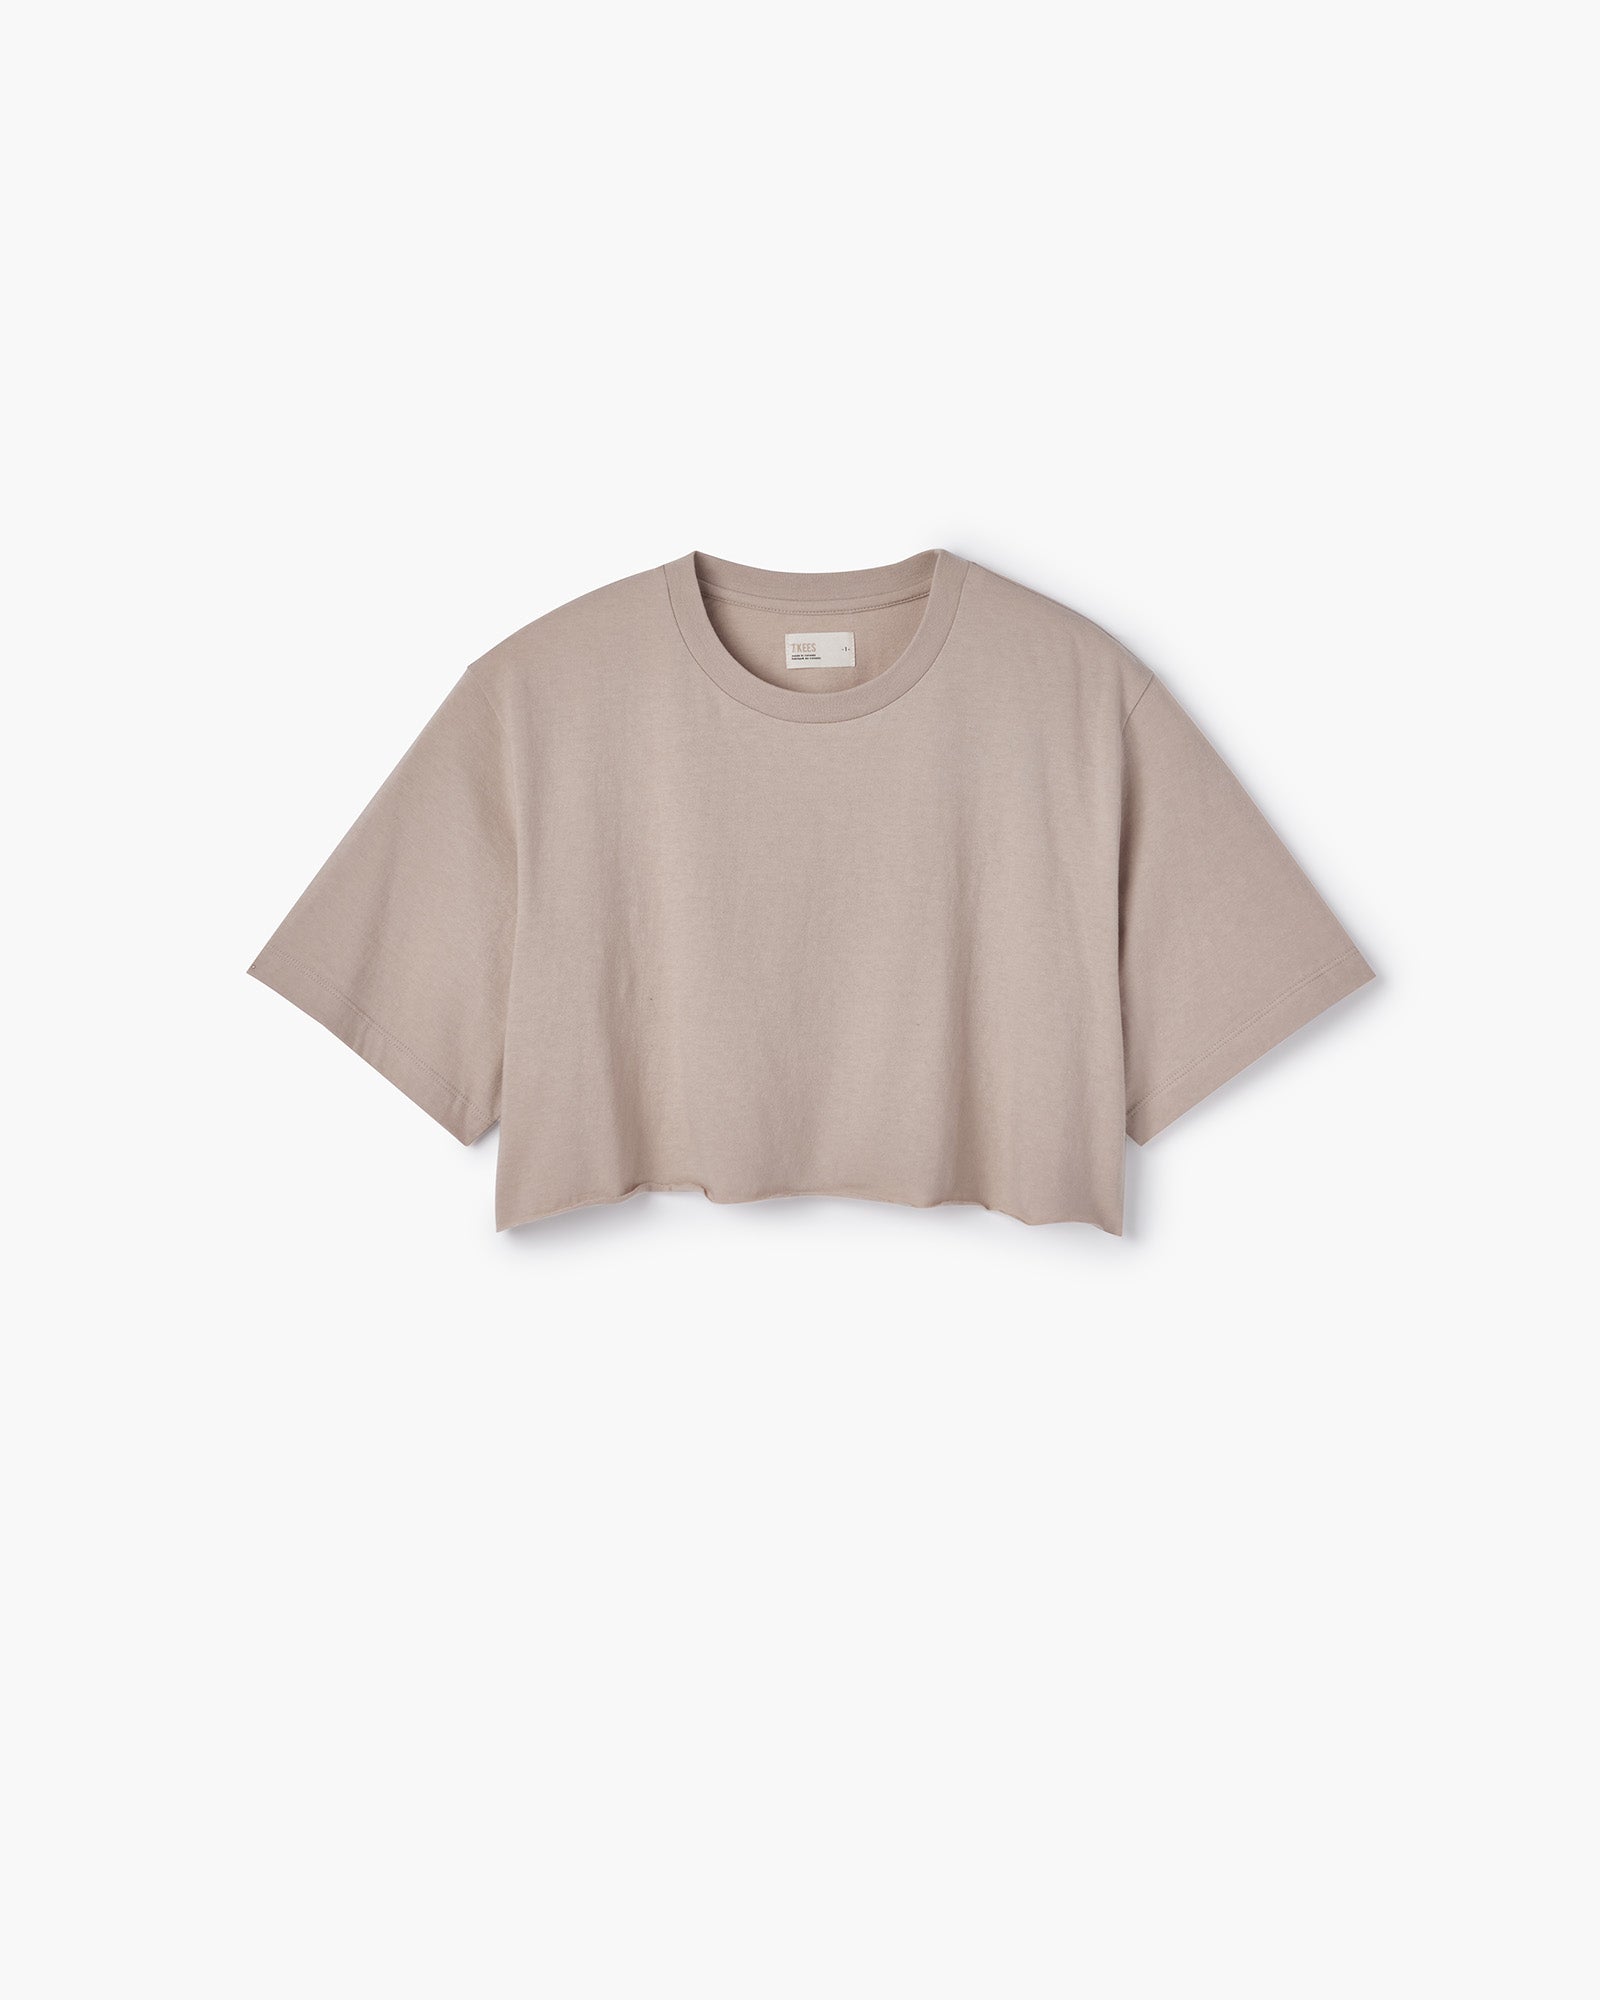 Cropped Tee in Sand | T-Shirts | Women's Clothing – TKEES